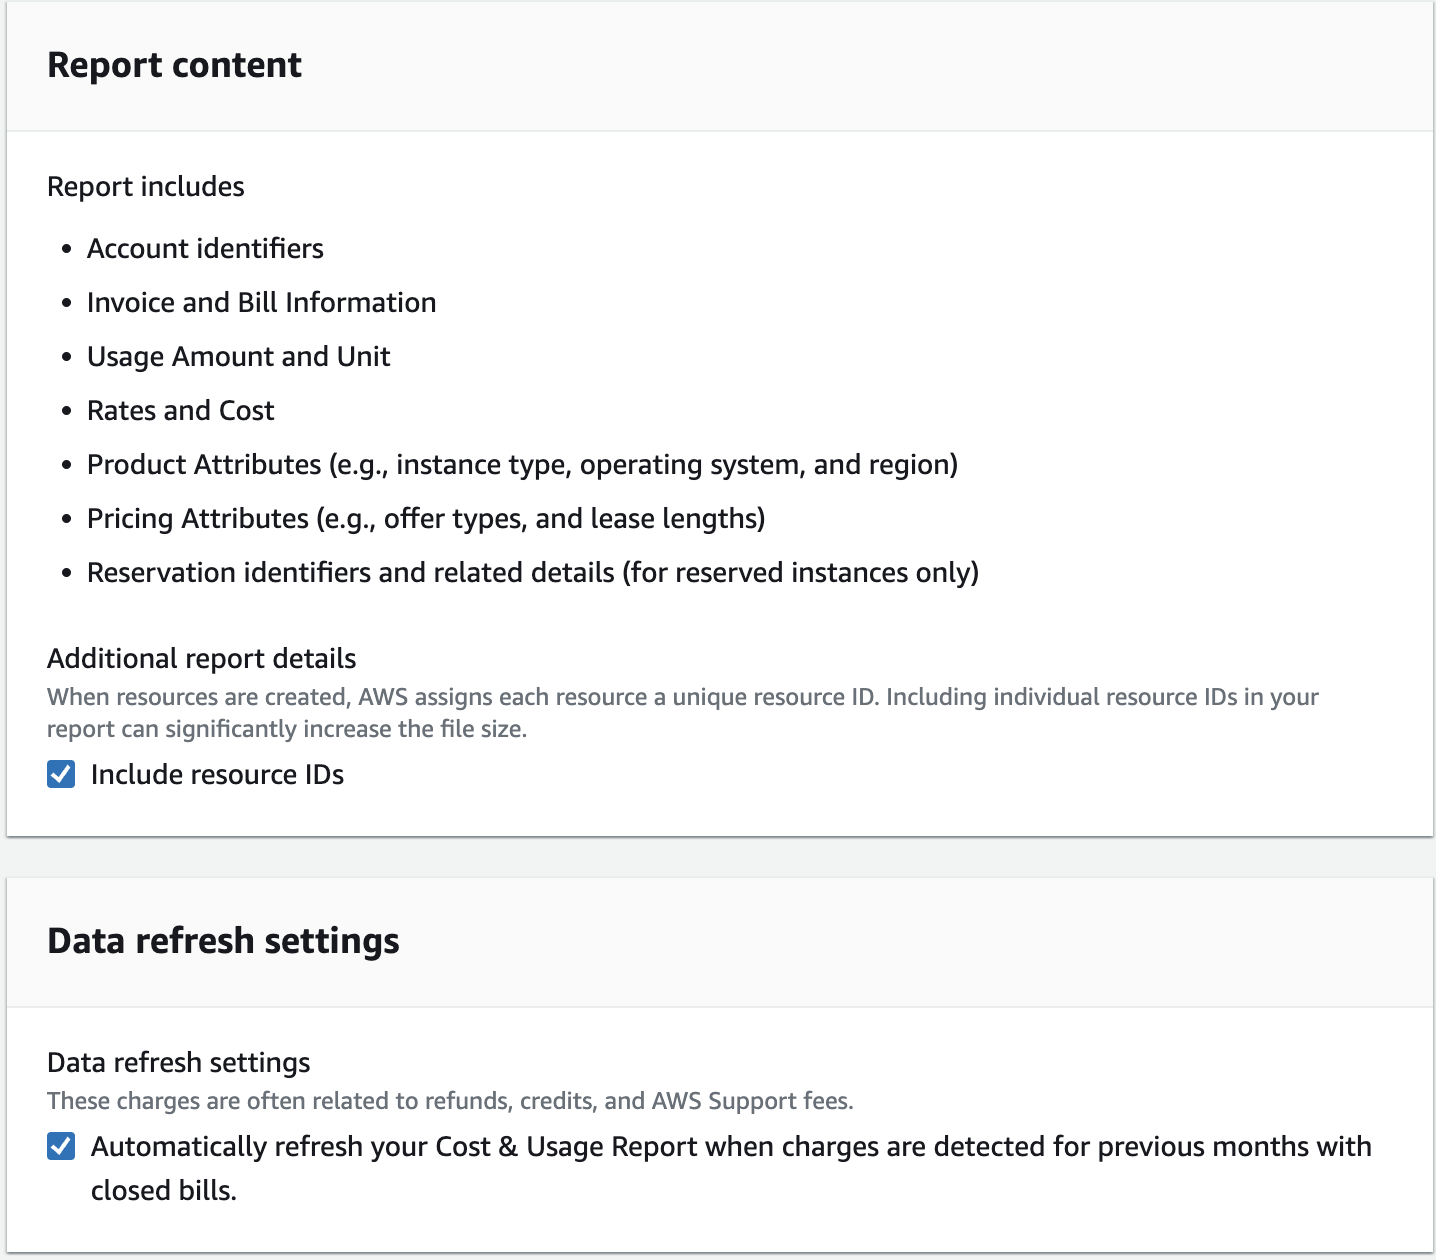 Report Content Options for Resource IDs and Data Refresh